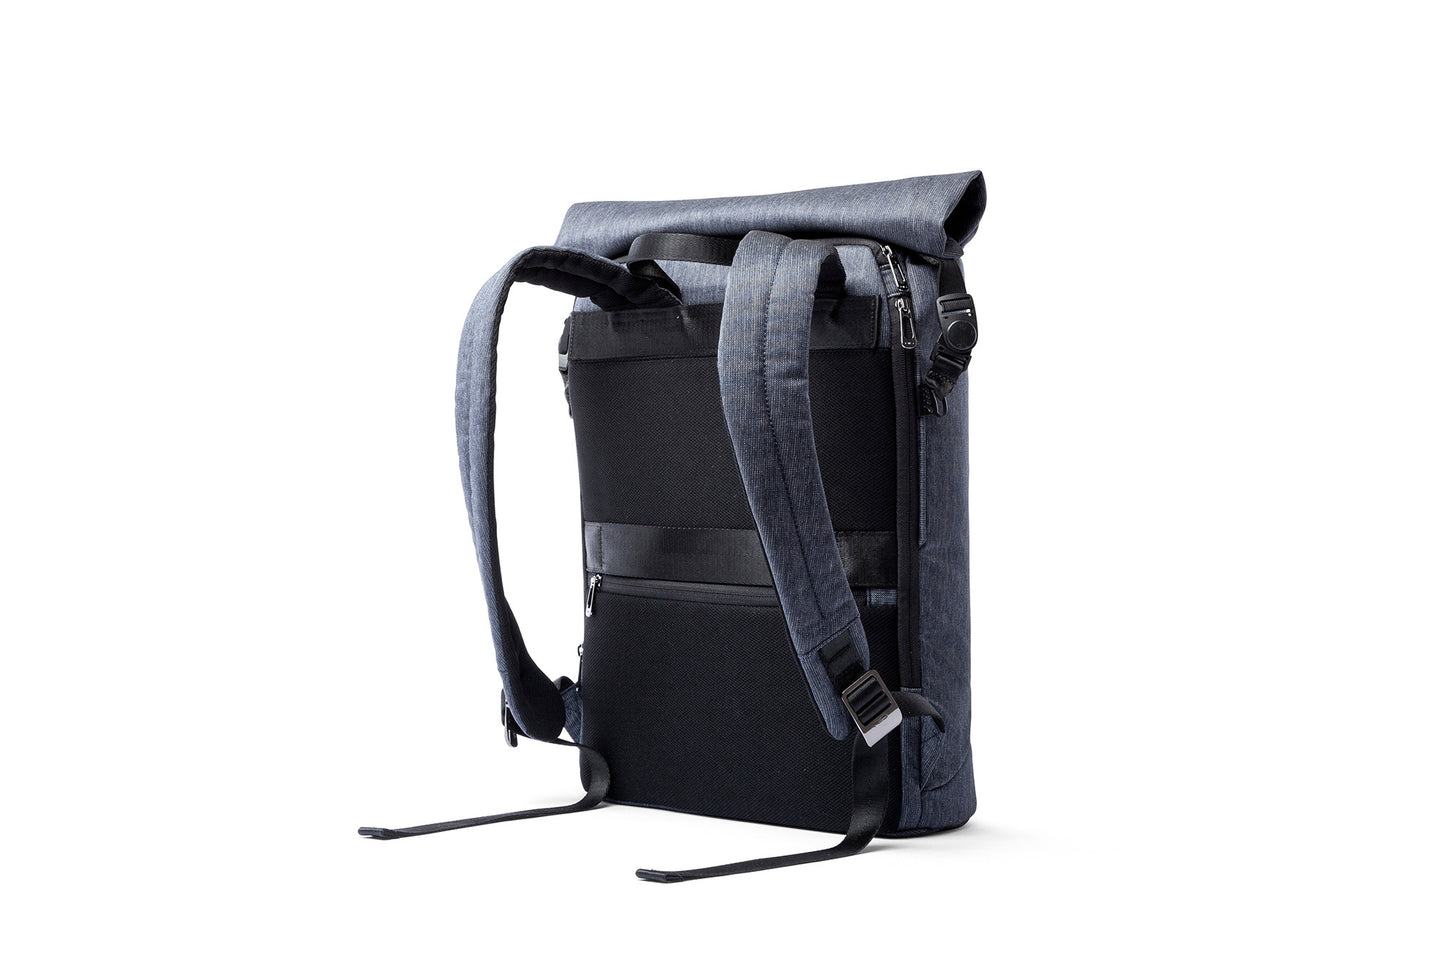 D2 Roll Top BackPack niid×URBANATURE D2 ロールトップ リュック バックパック ニード